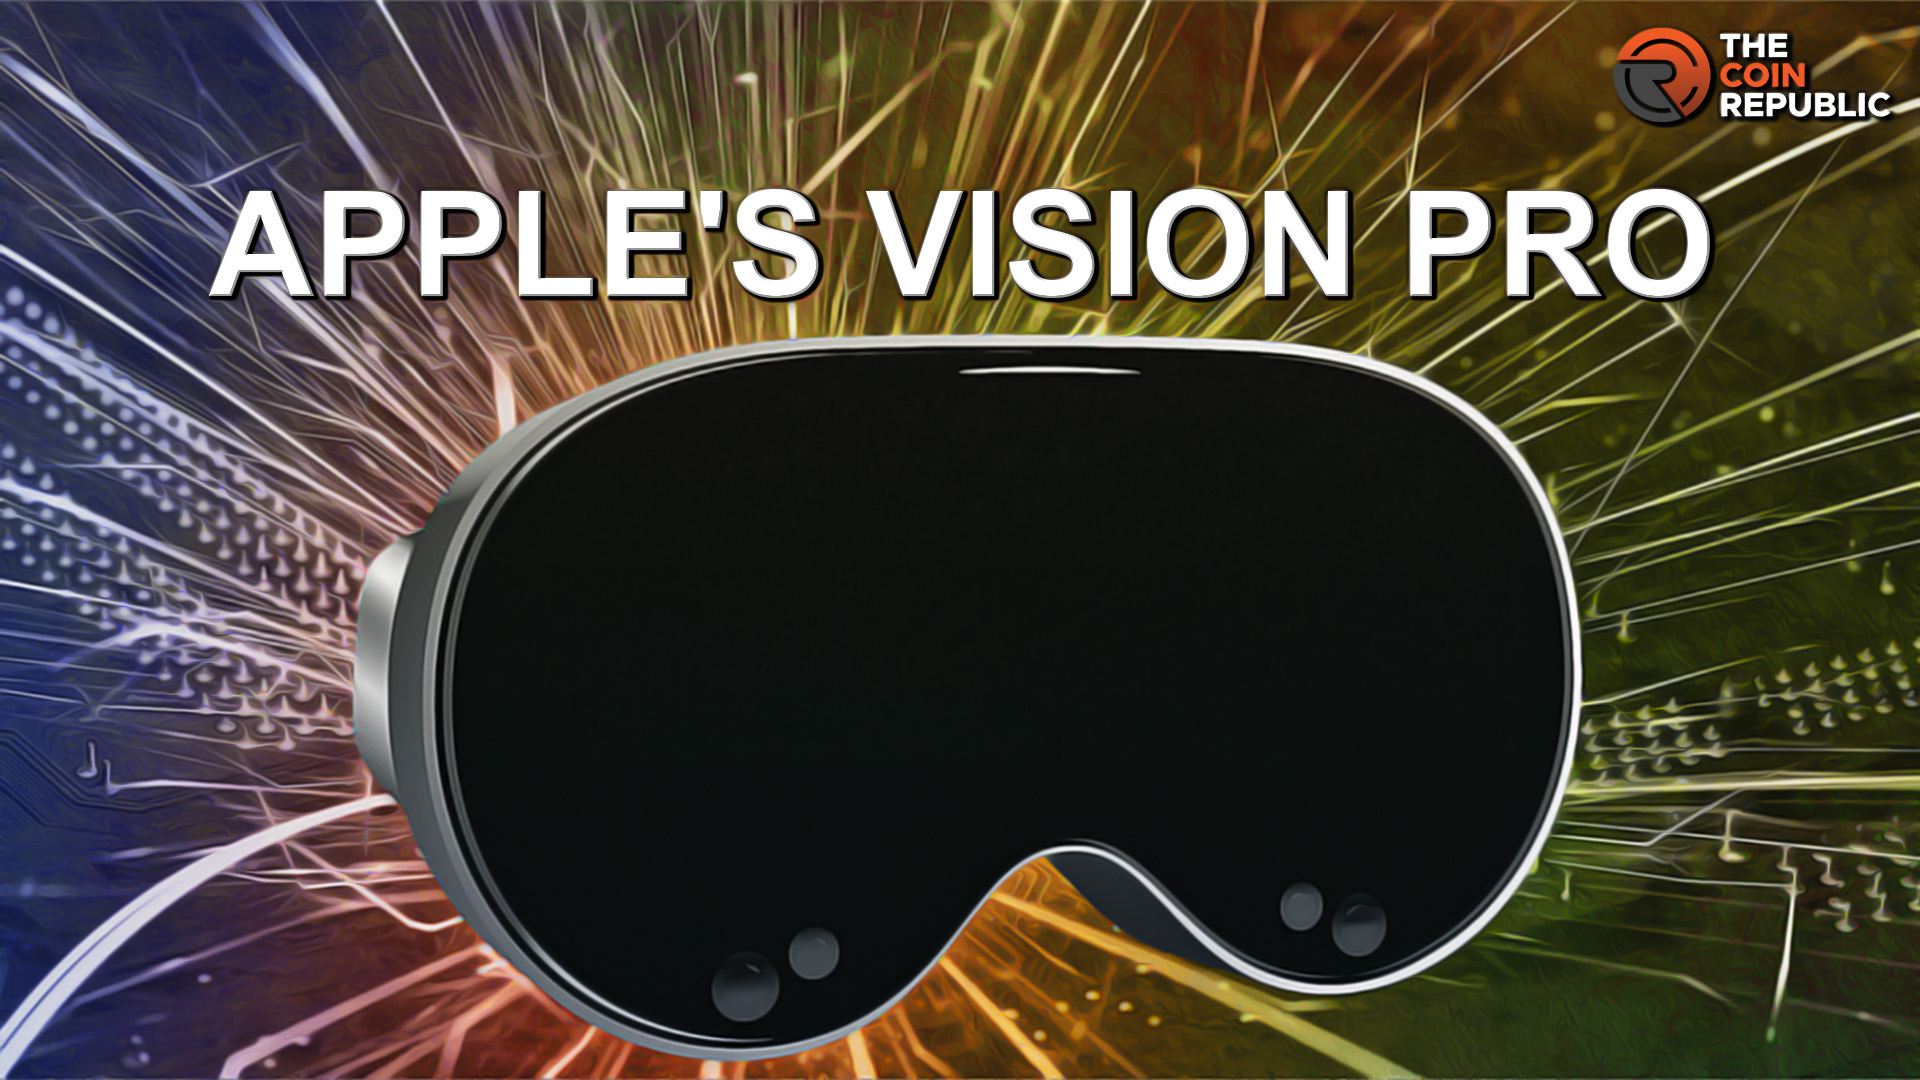 Is Apple Vision Pro’s Design More Imposing Than Its Competitors?